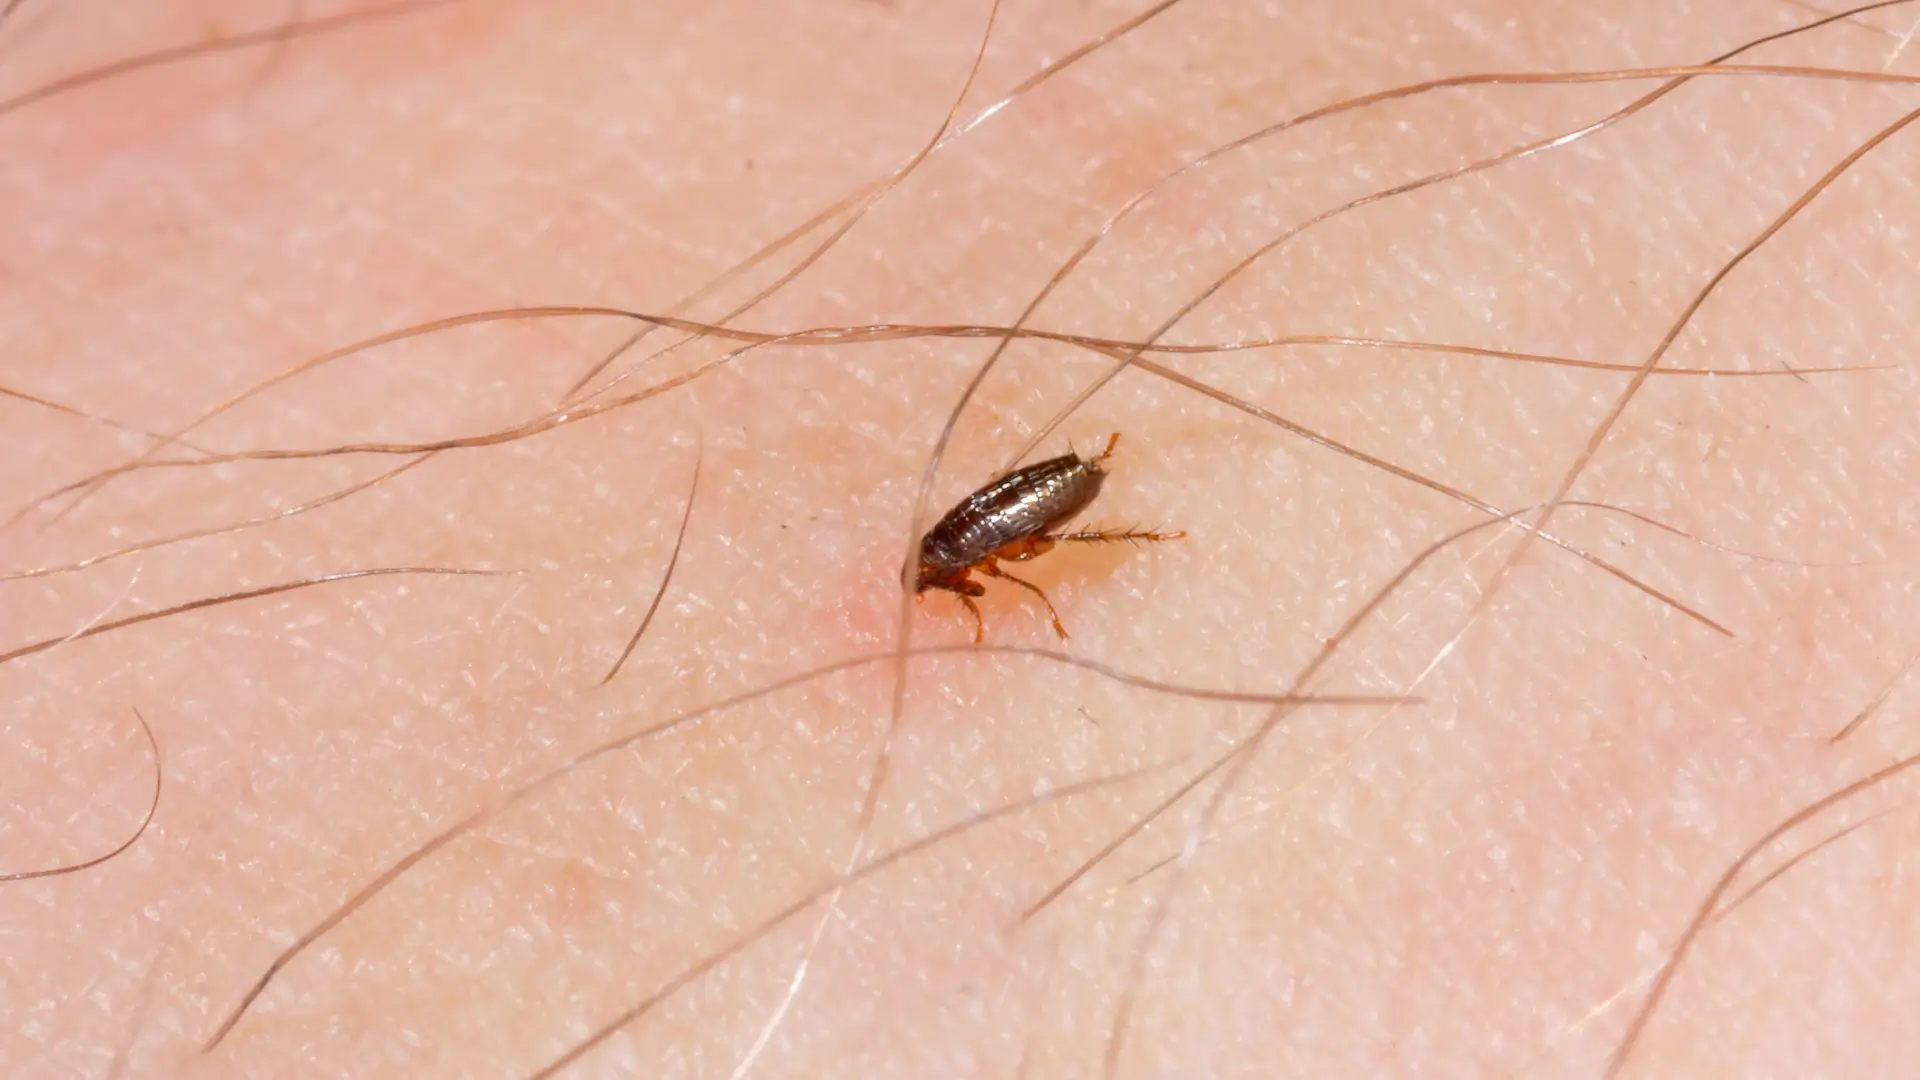 lea bites can be painful and uncomfortable. Learn about the causes of flea bites, their symptoms, and the best treatments and prevention methods. Stay informed and protect yourself from flea bites.